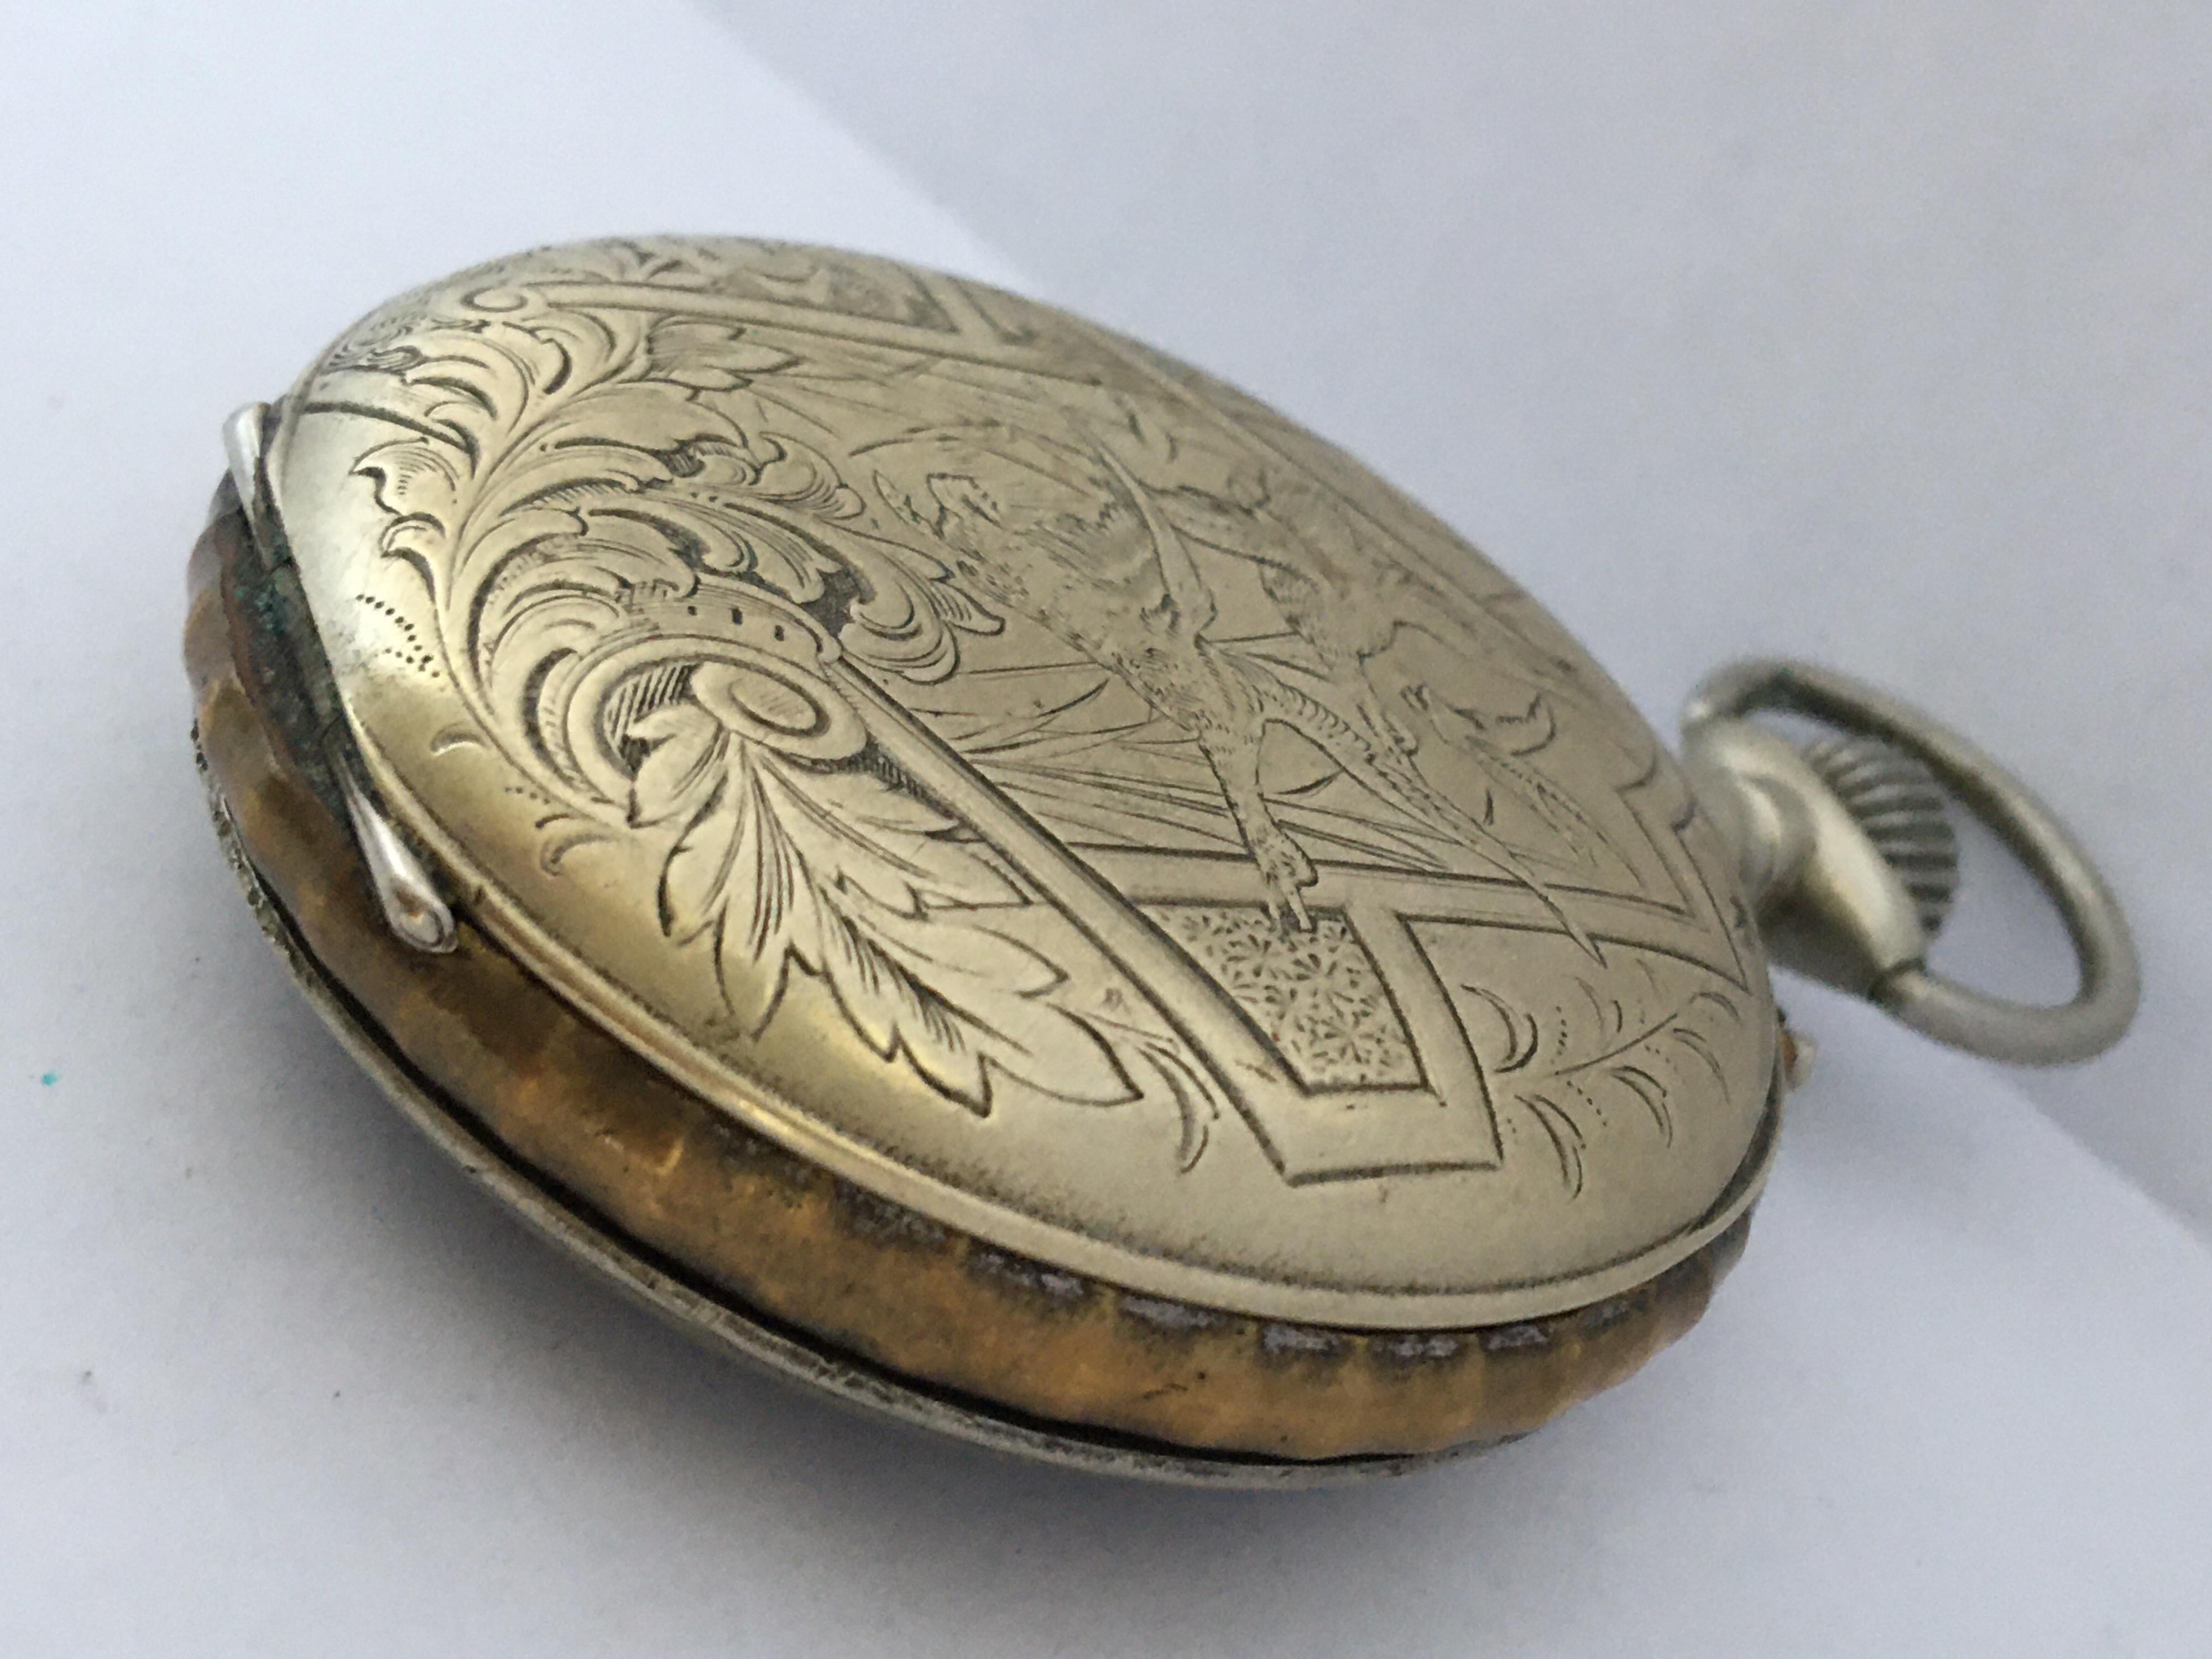 Antique Beautifully Engraved Hand Winding Pocket Watch with Roskopf Escapement For Sale 4